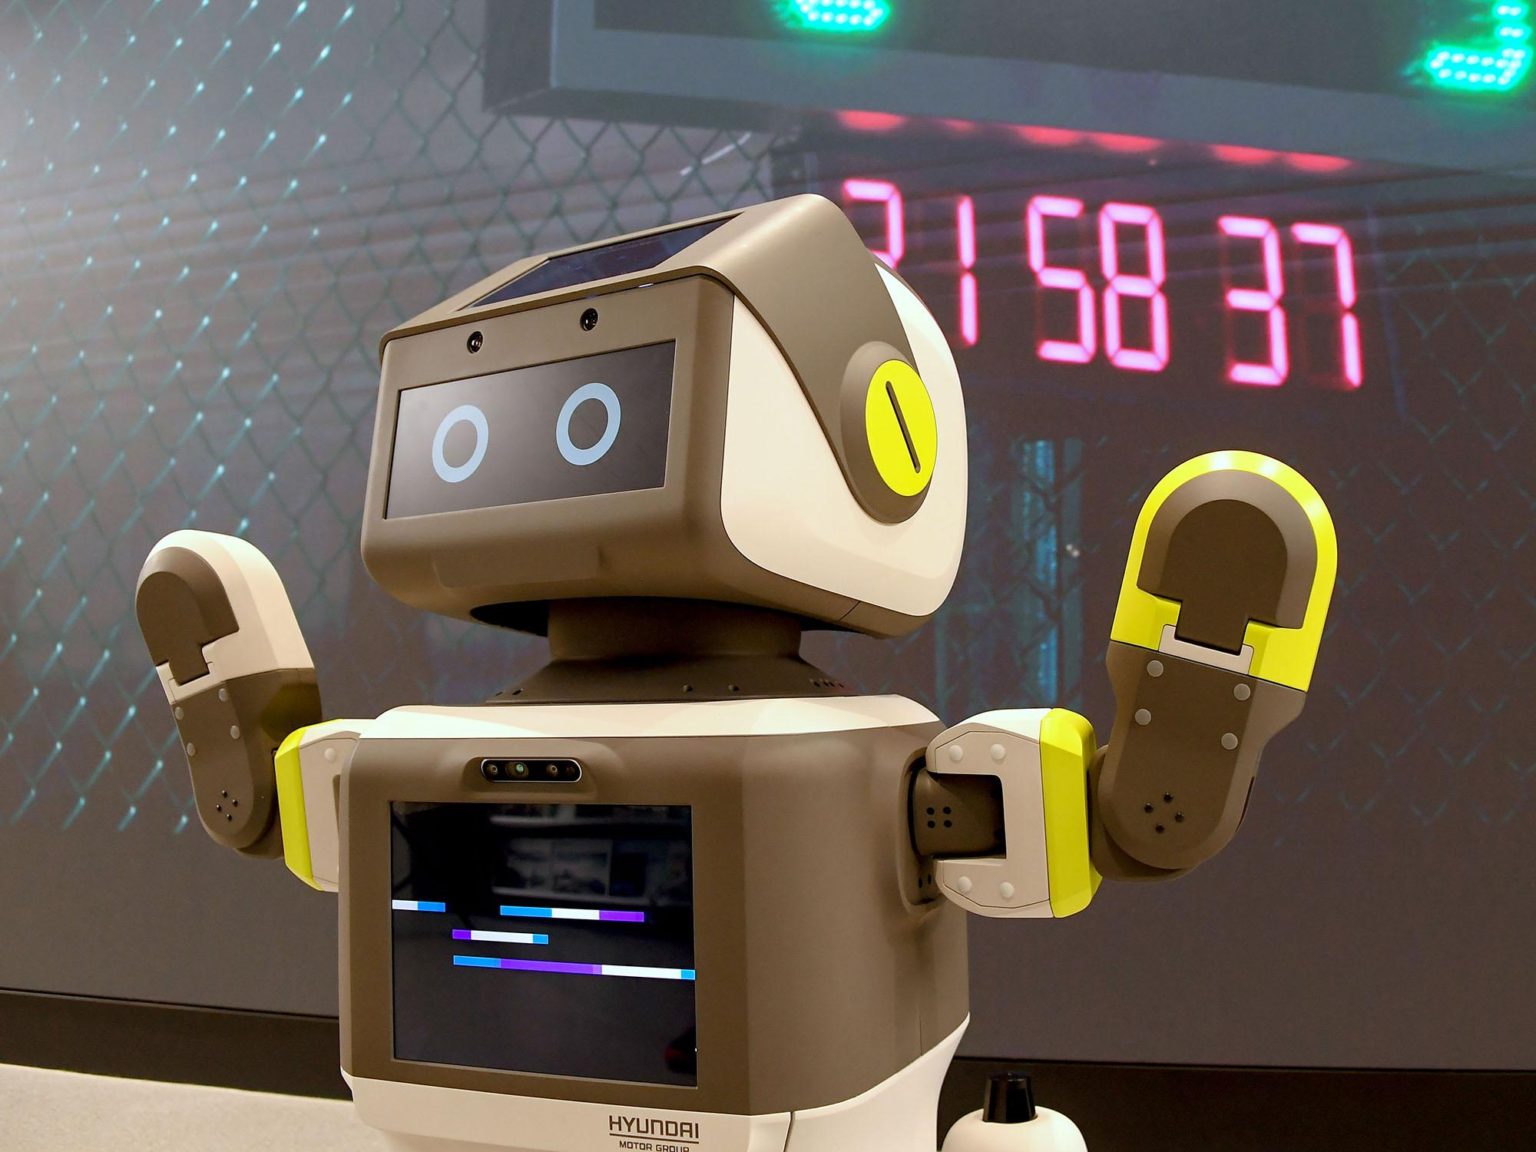 A new robot is helping with customer service at one Hyundai store in South Korea as part of a trial program.